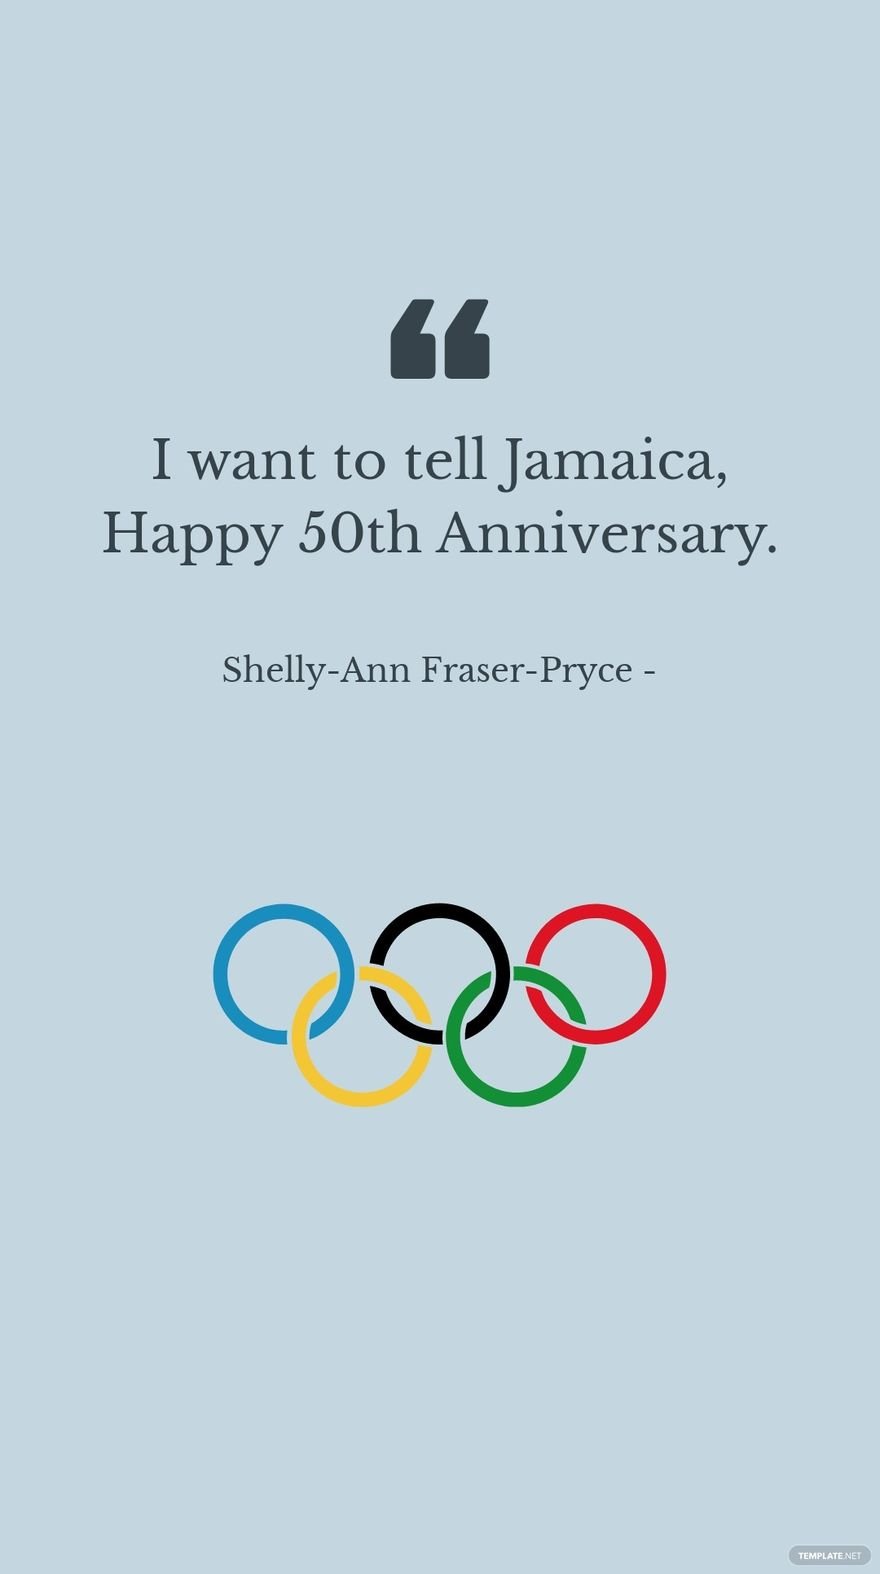 Free Shelly-Ann Fraser-Pryce - I want to tell Jamaica, Happy 50th Anniversary.